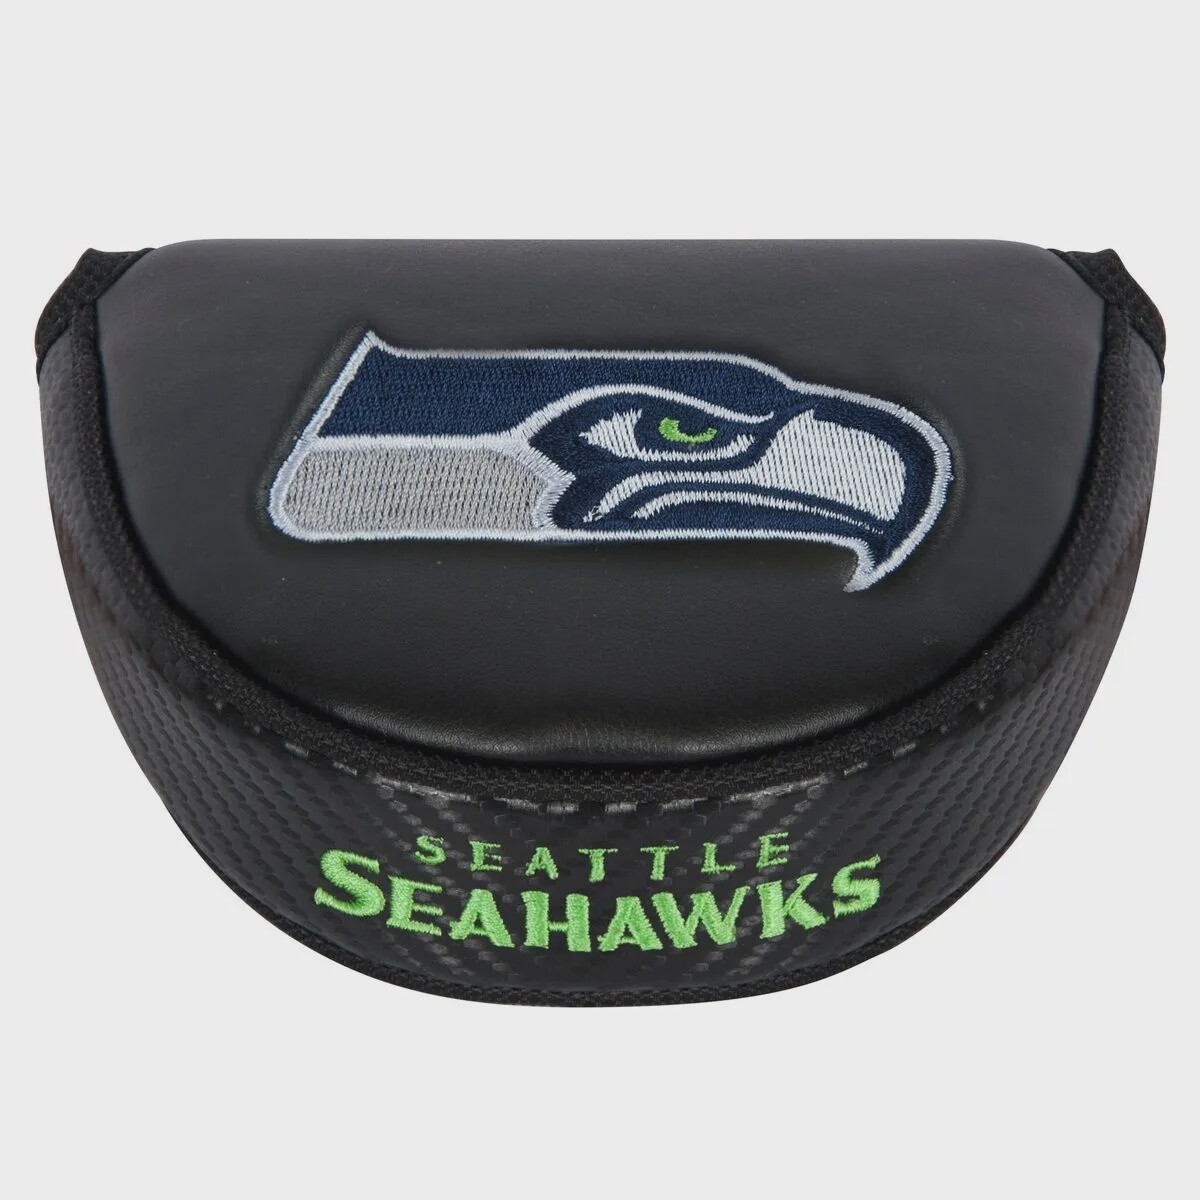 Seattle Seahawks Mallet Putter Cover